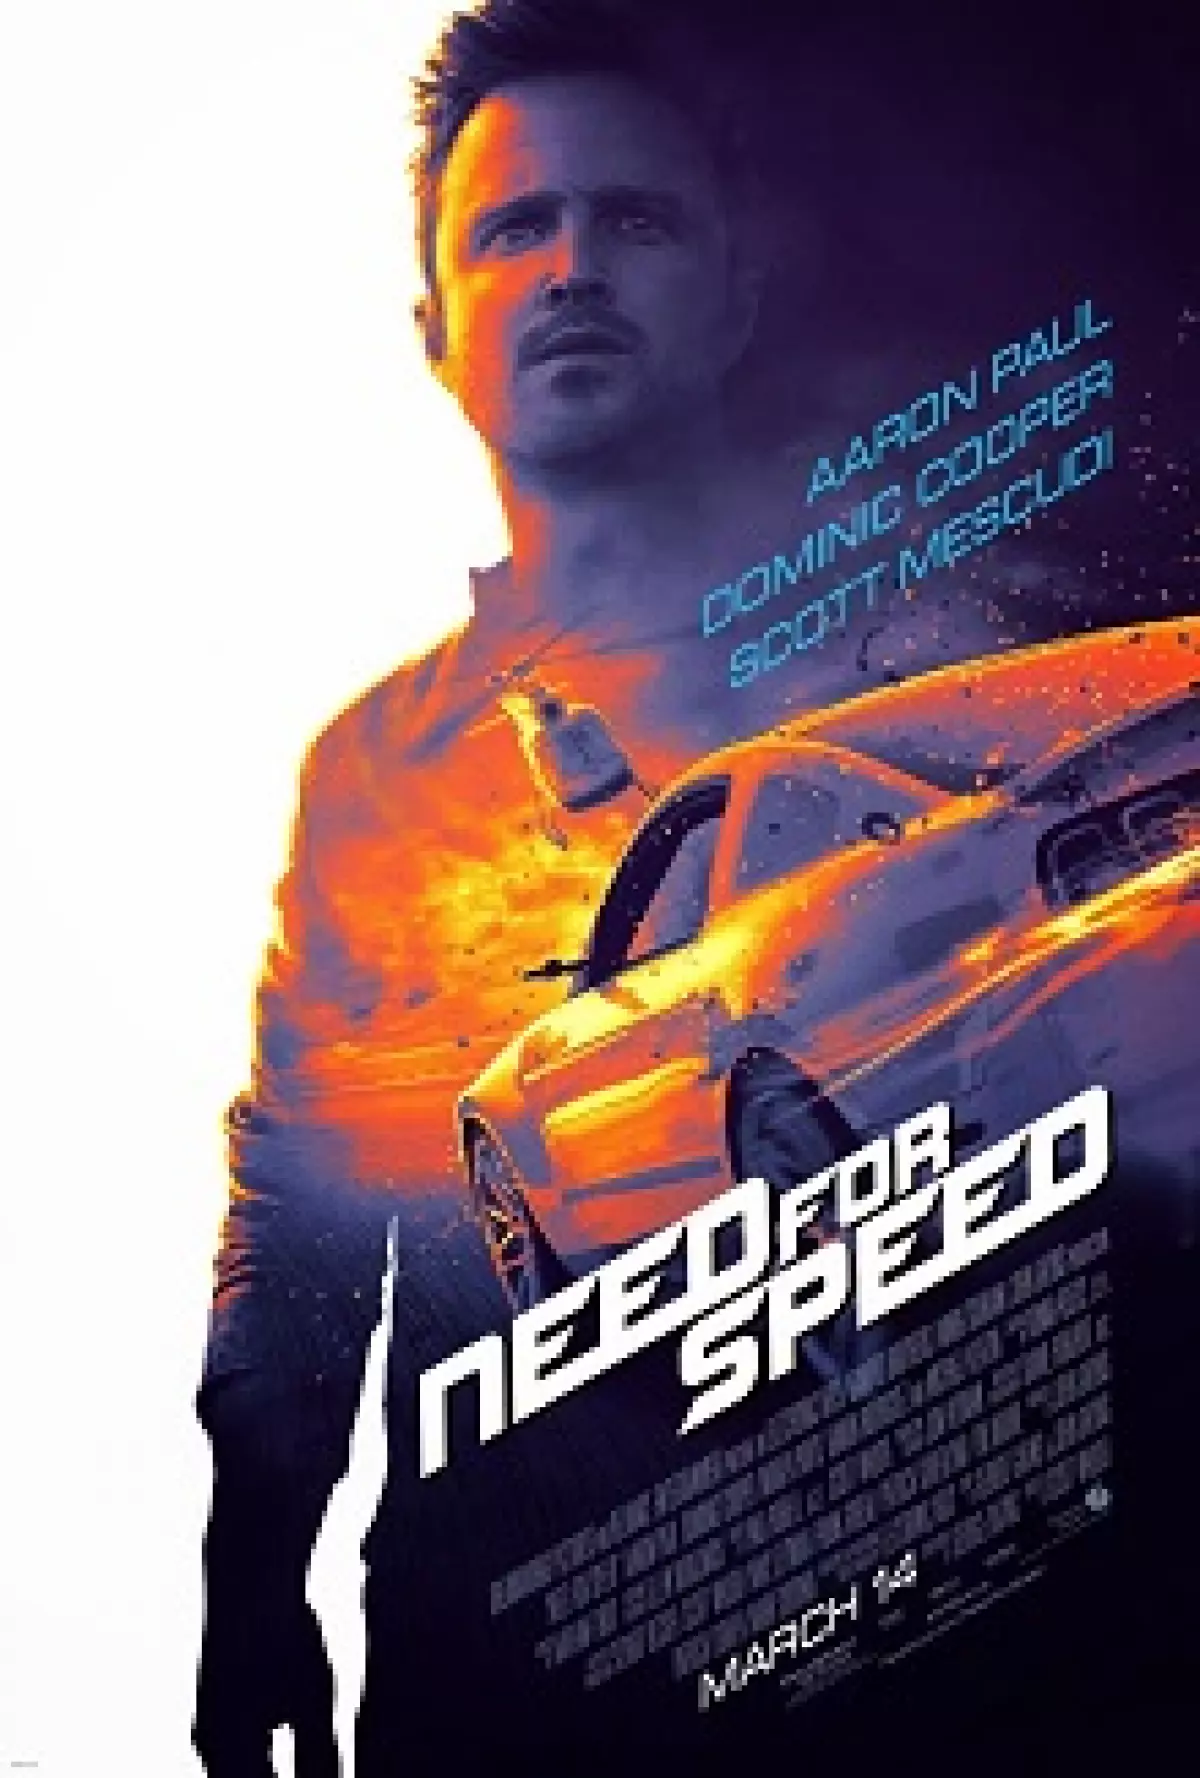 Need for Speed Movie Poster